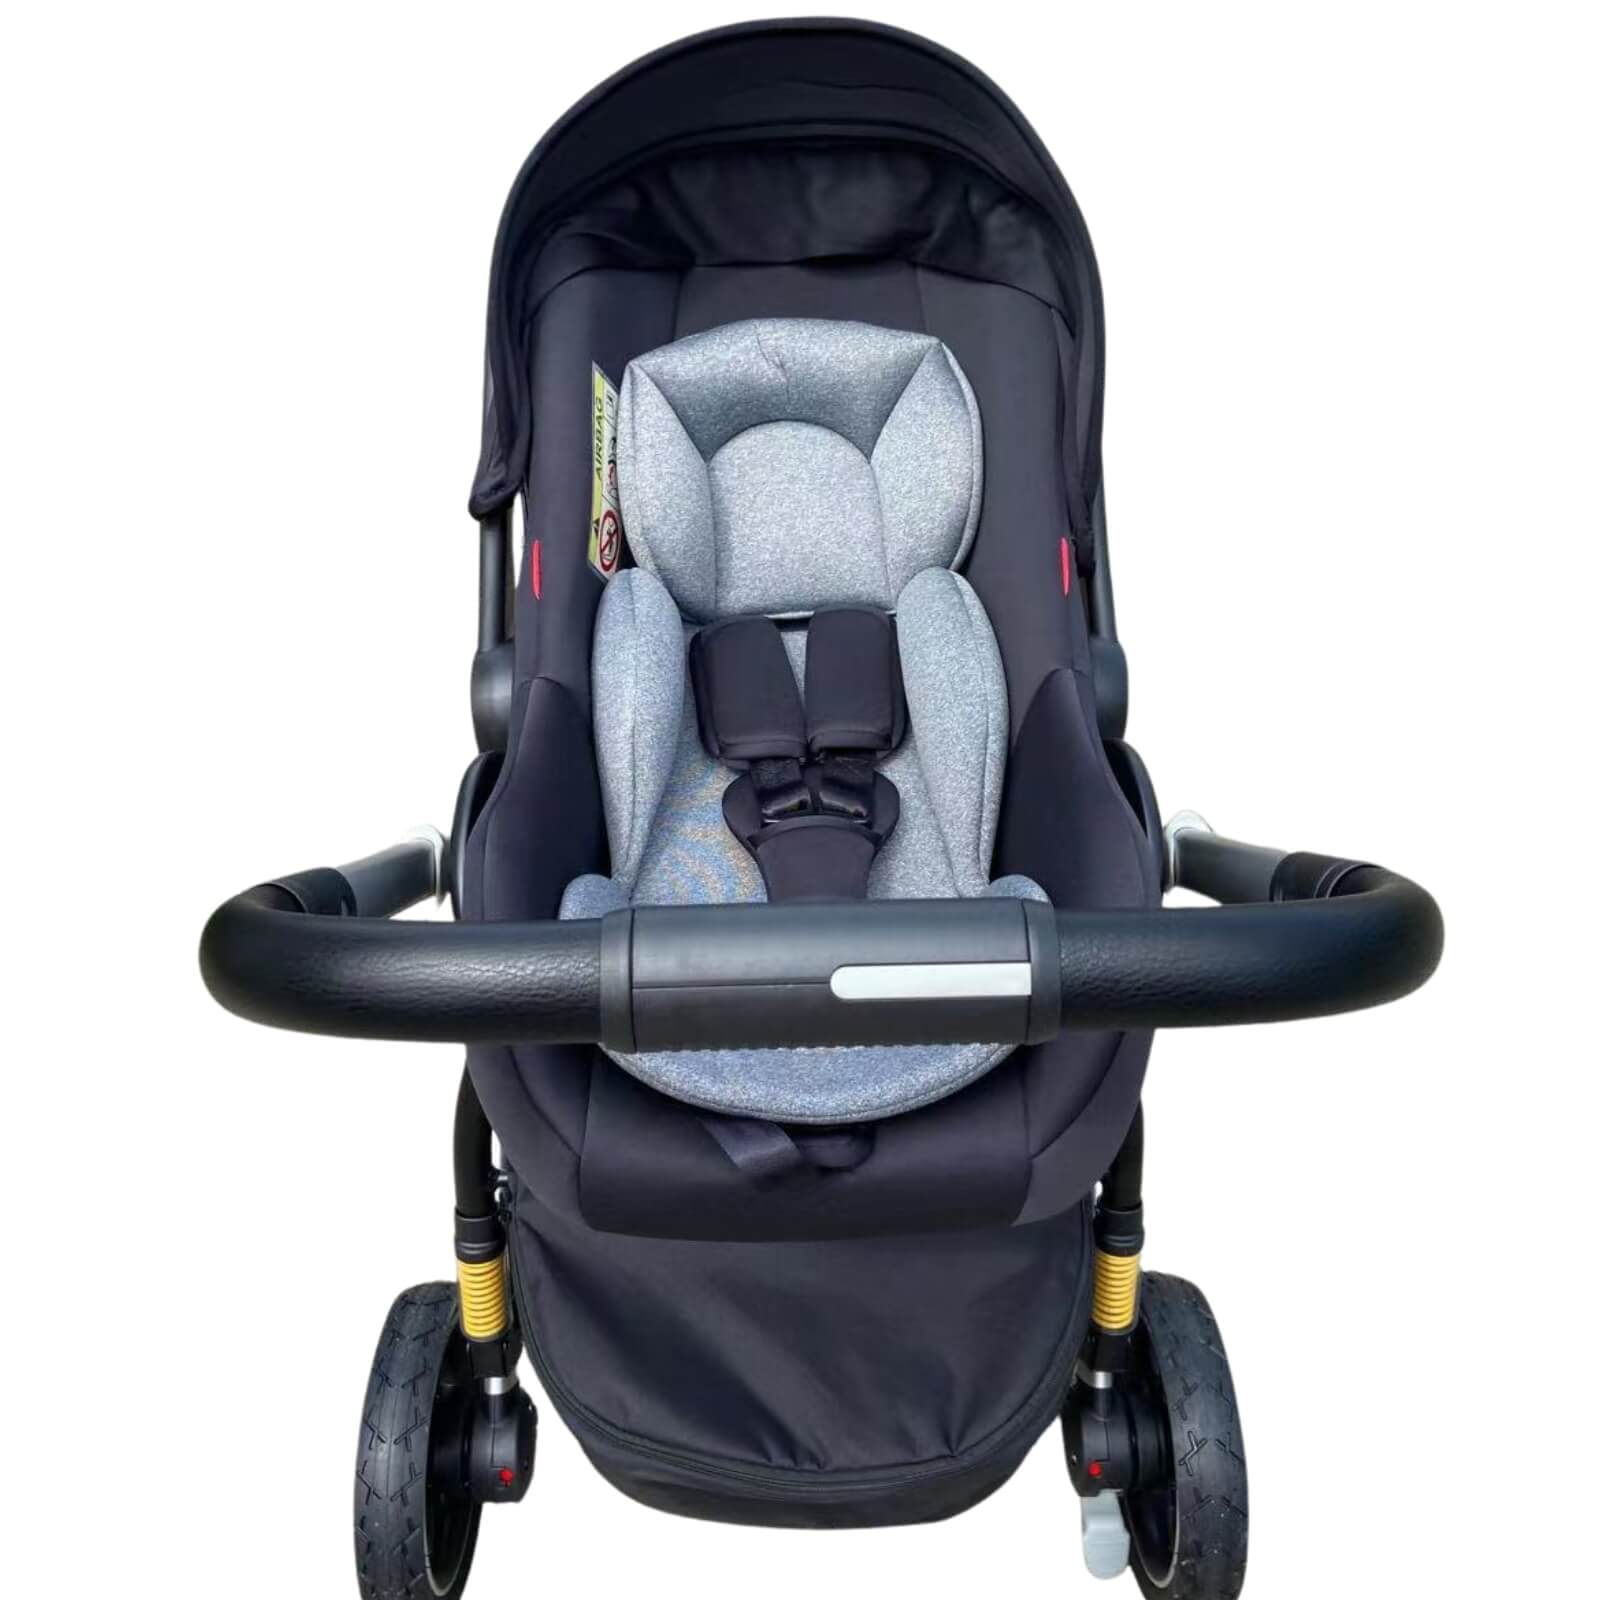 Black Three Wheels Baby Stroller, Infant Carry Cot & Baby Car Seat